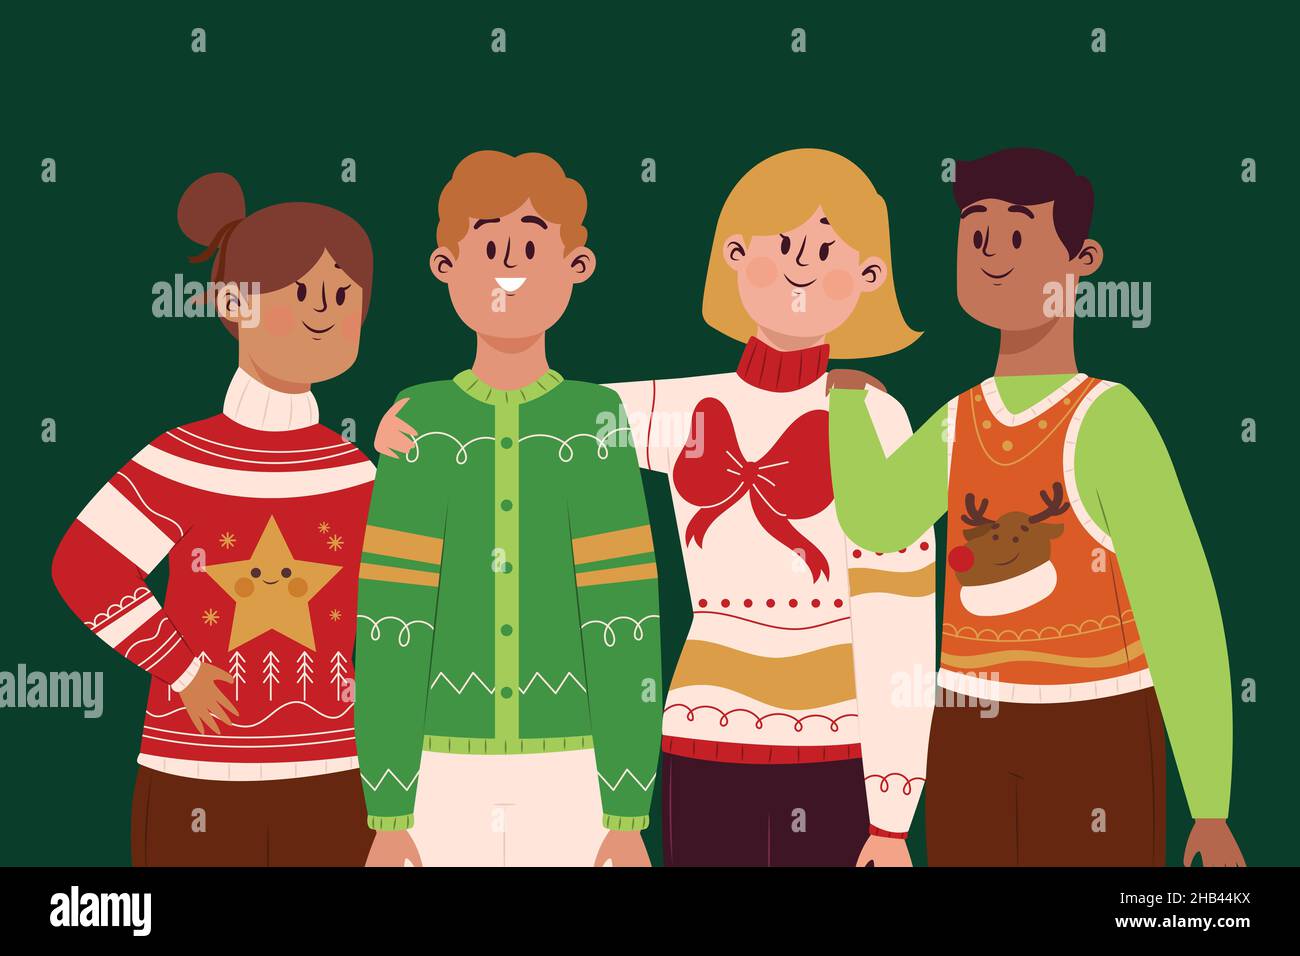 people wearing ugly sweaters vector design illustration Stock Vector